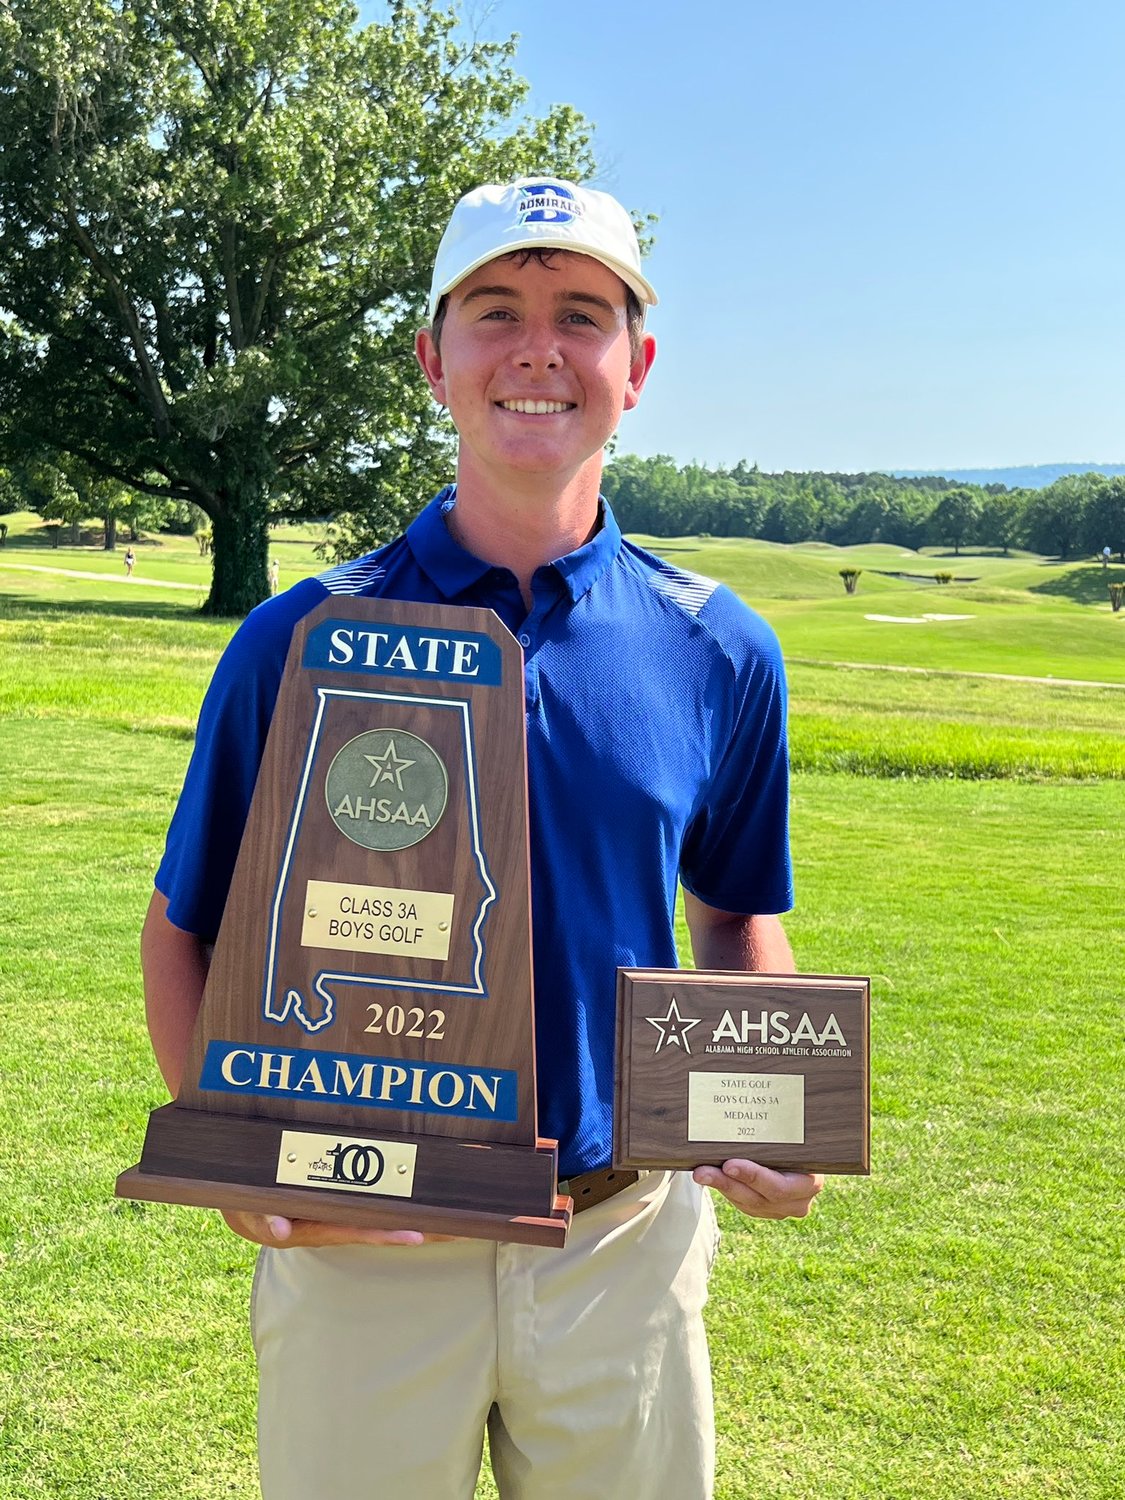 Recent Bayside Academy graduate Cole Komyati with the championship trophies after his individual title helped the Admirals capture the Class 3A team title this spring. Komyati collected 183.5 points over the last year to help land a spot on the Alabama Golf Association’s second-team all-state.